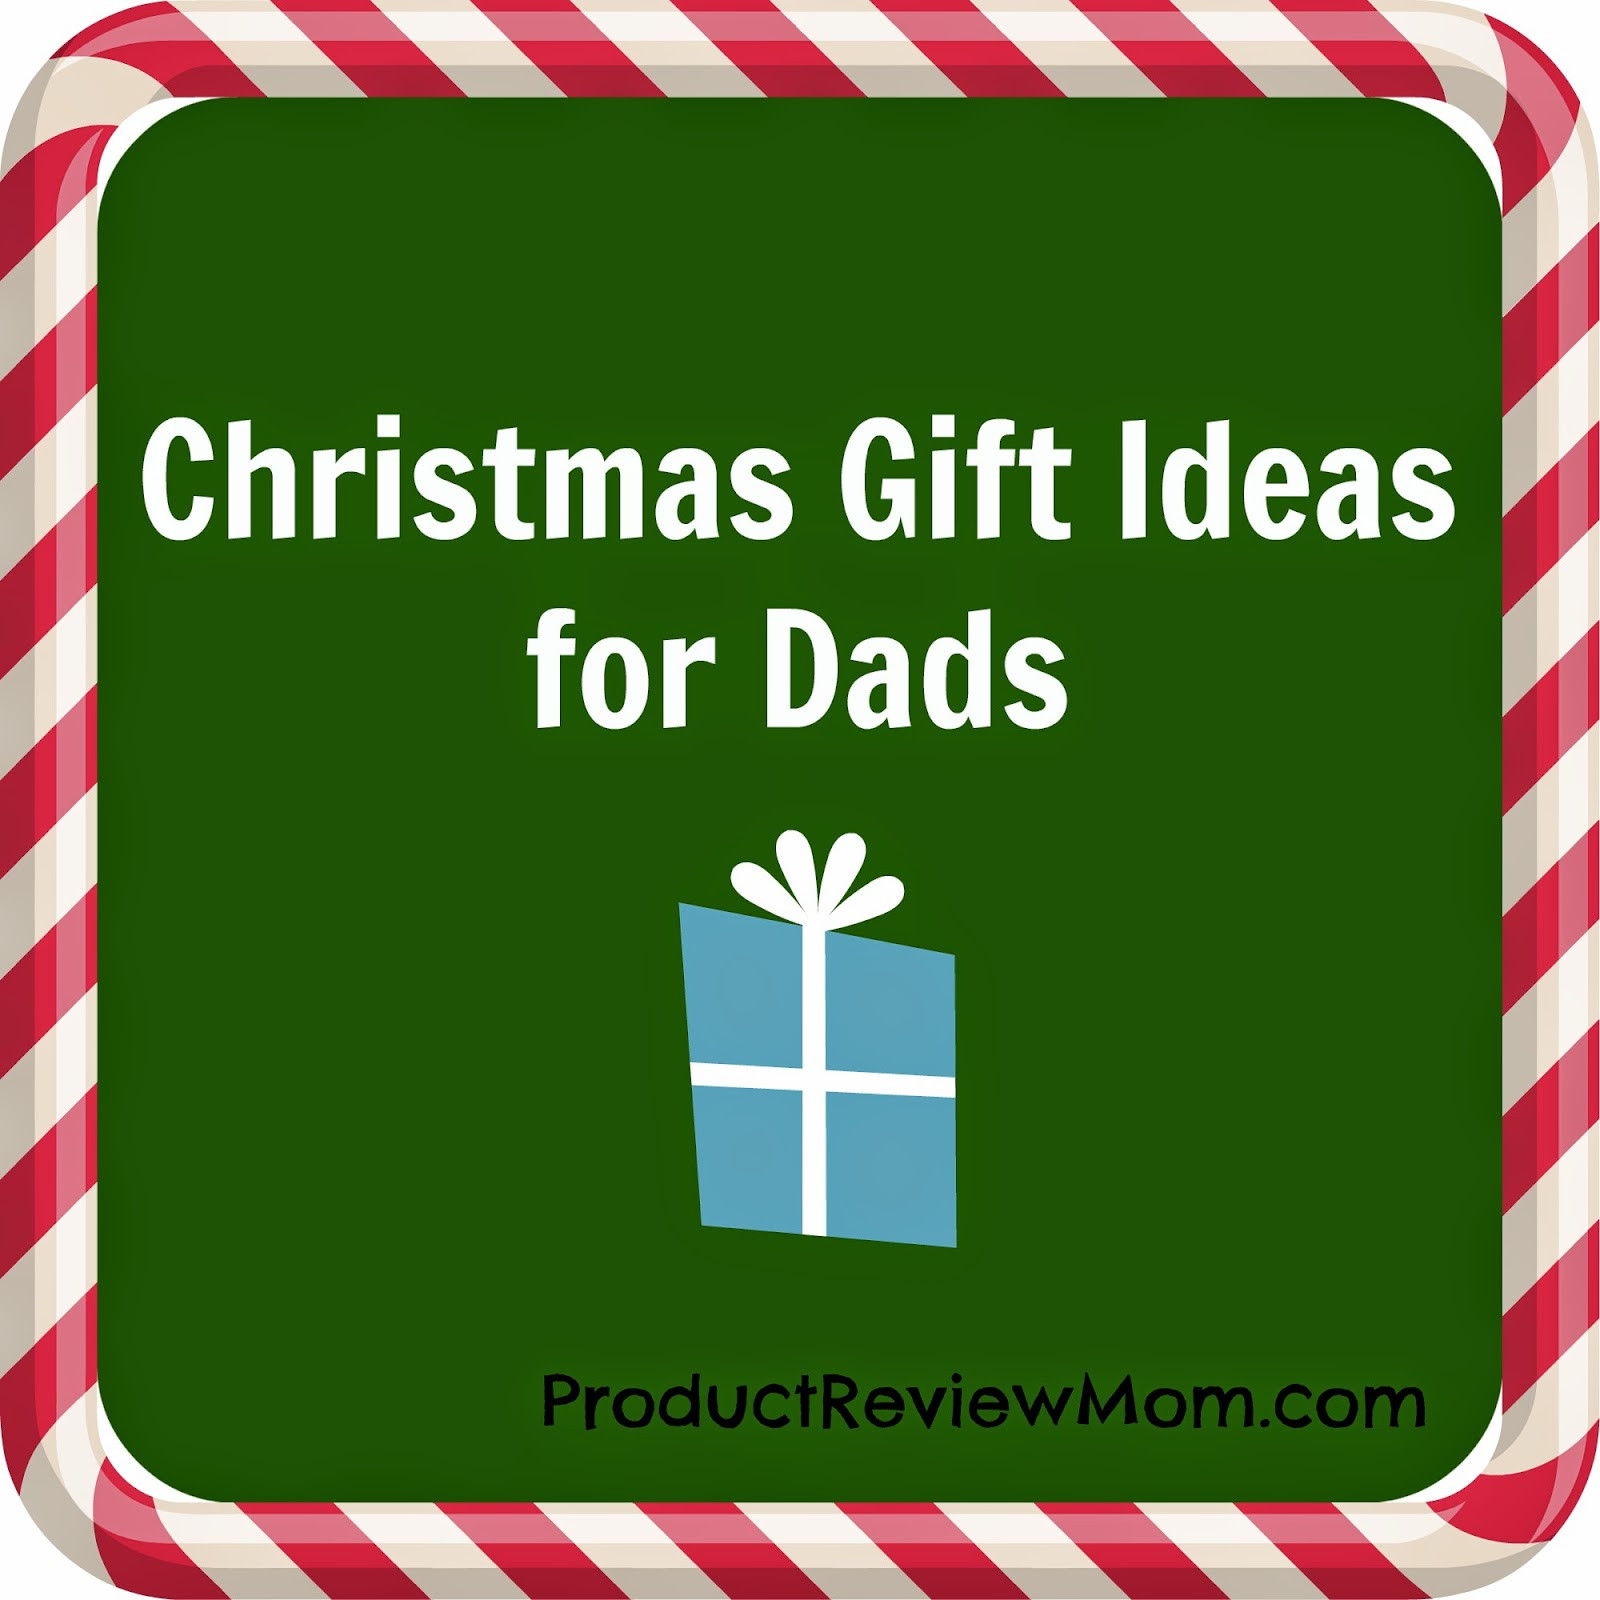 Christmas Gift Ideas For Dads<br />
 Christmas Gift Ideas for Dads HolidayGiftGuide